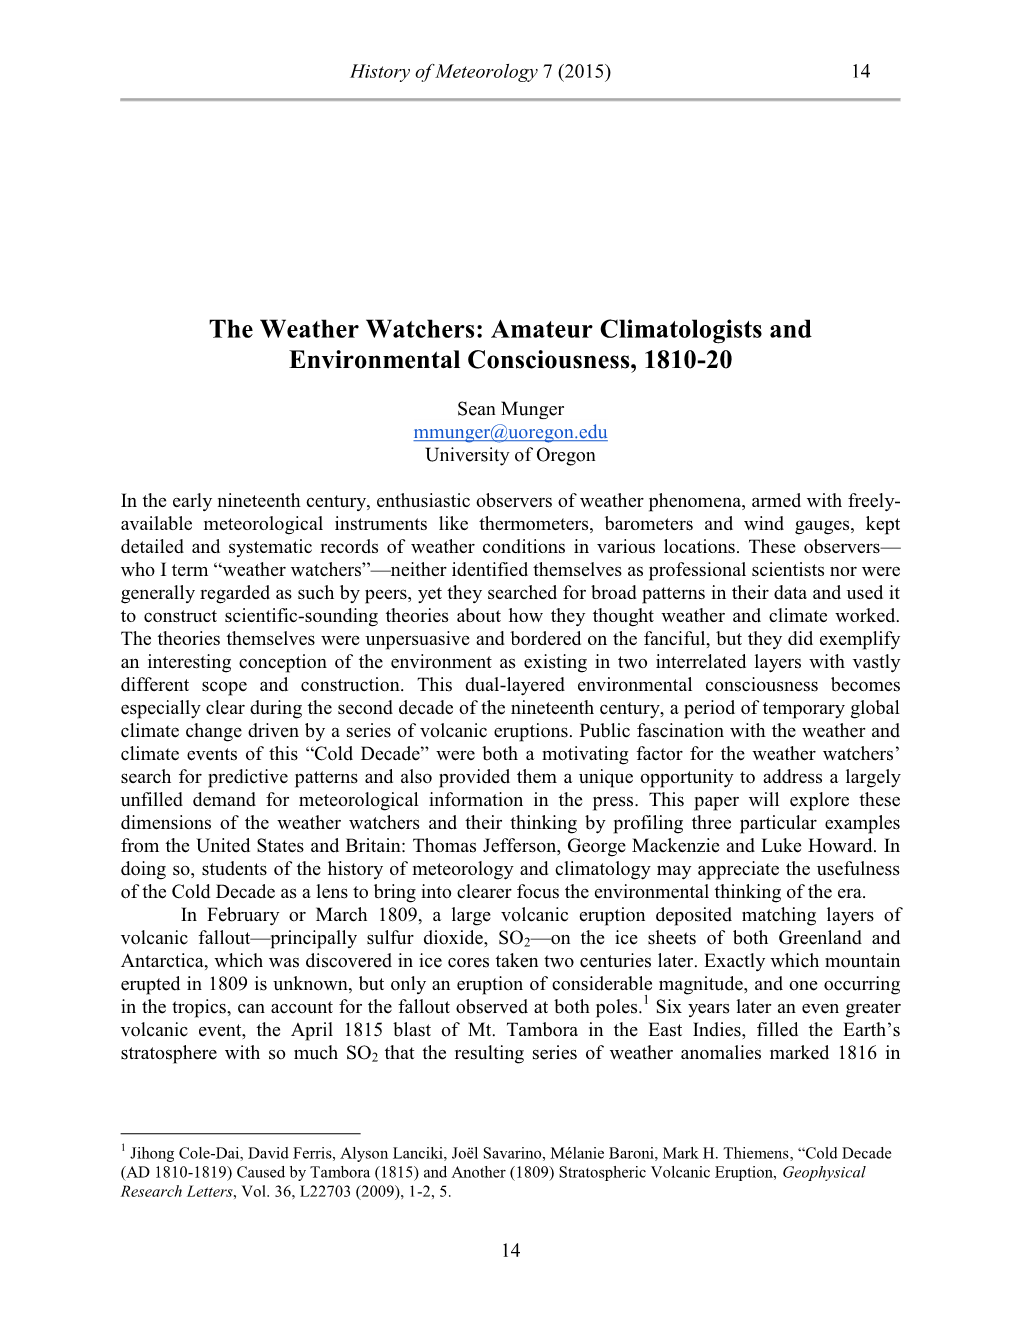 The Weather Watchers: Amateur Climatologists and Environmental Consciousness, 1810-20